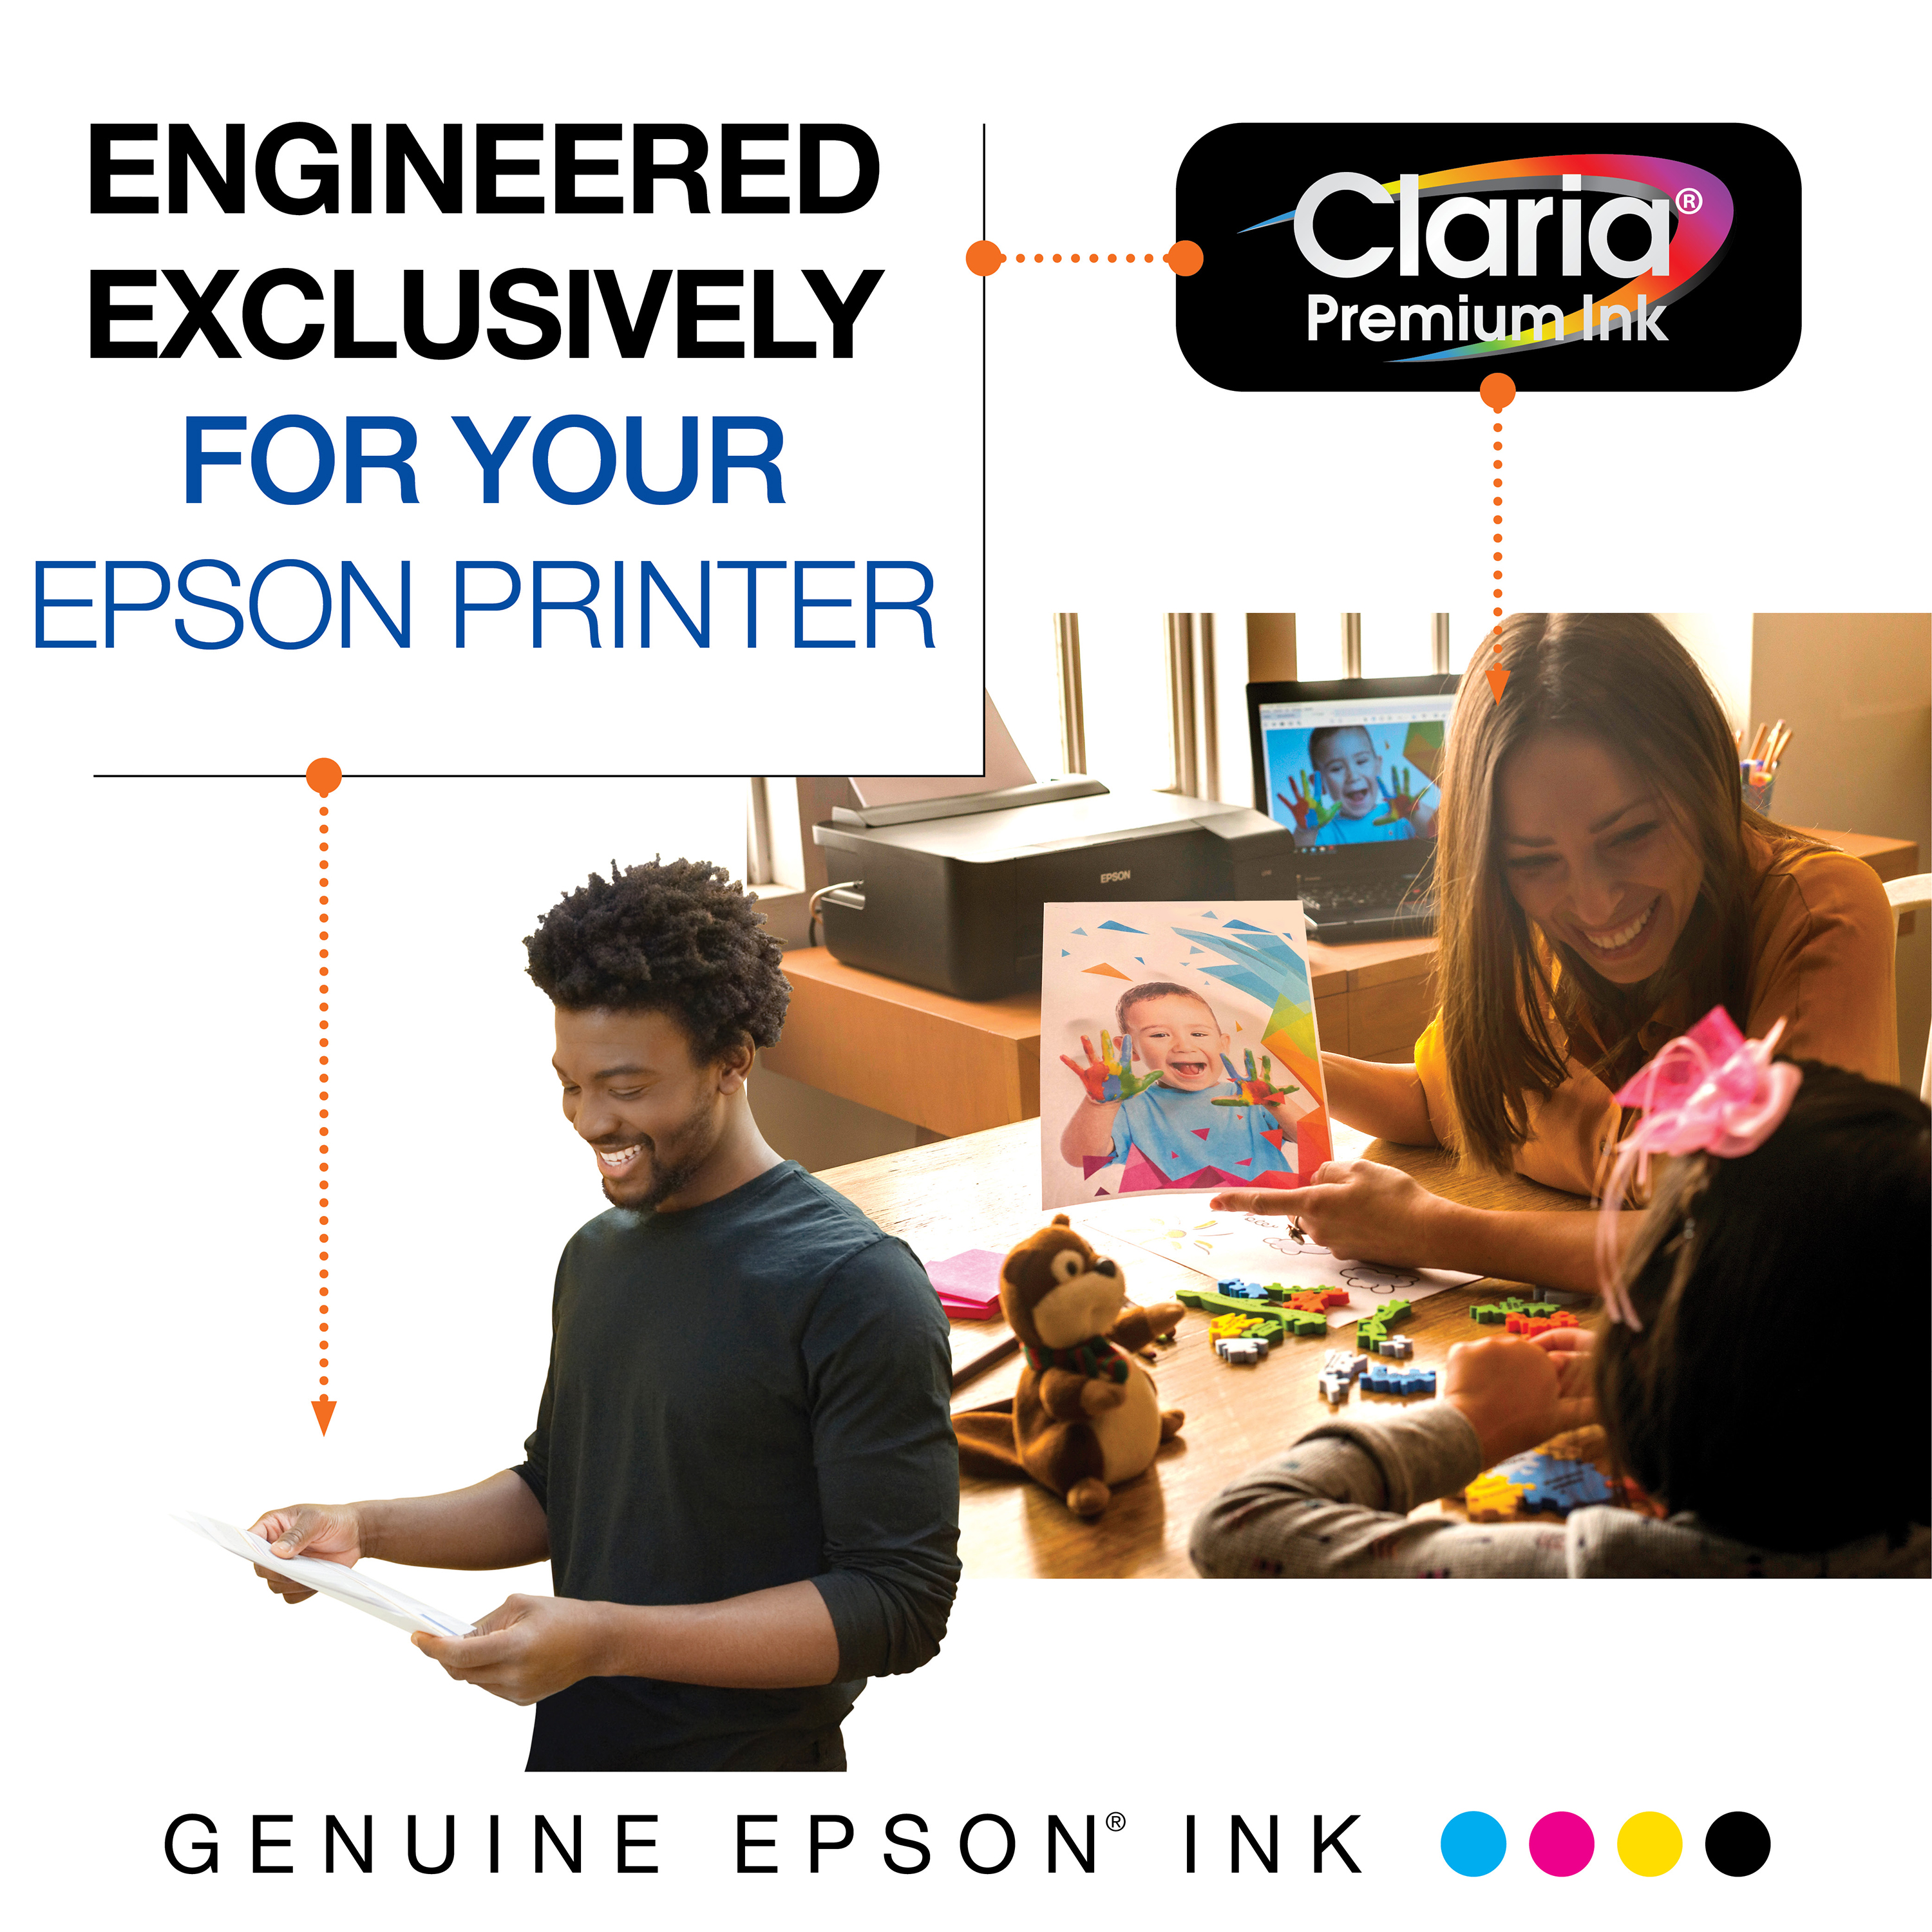 EPSON 78 Claria Hi-Definition Ink Standard Capacity Black Cartridge (T078120-S) Works with Artisan 50, Photo R260, R280, R380, RX580, RX595, RX680 - image 5 of 5